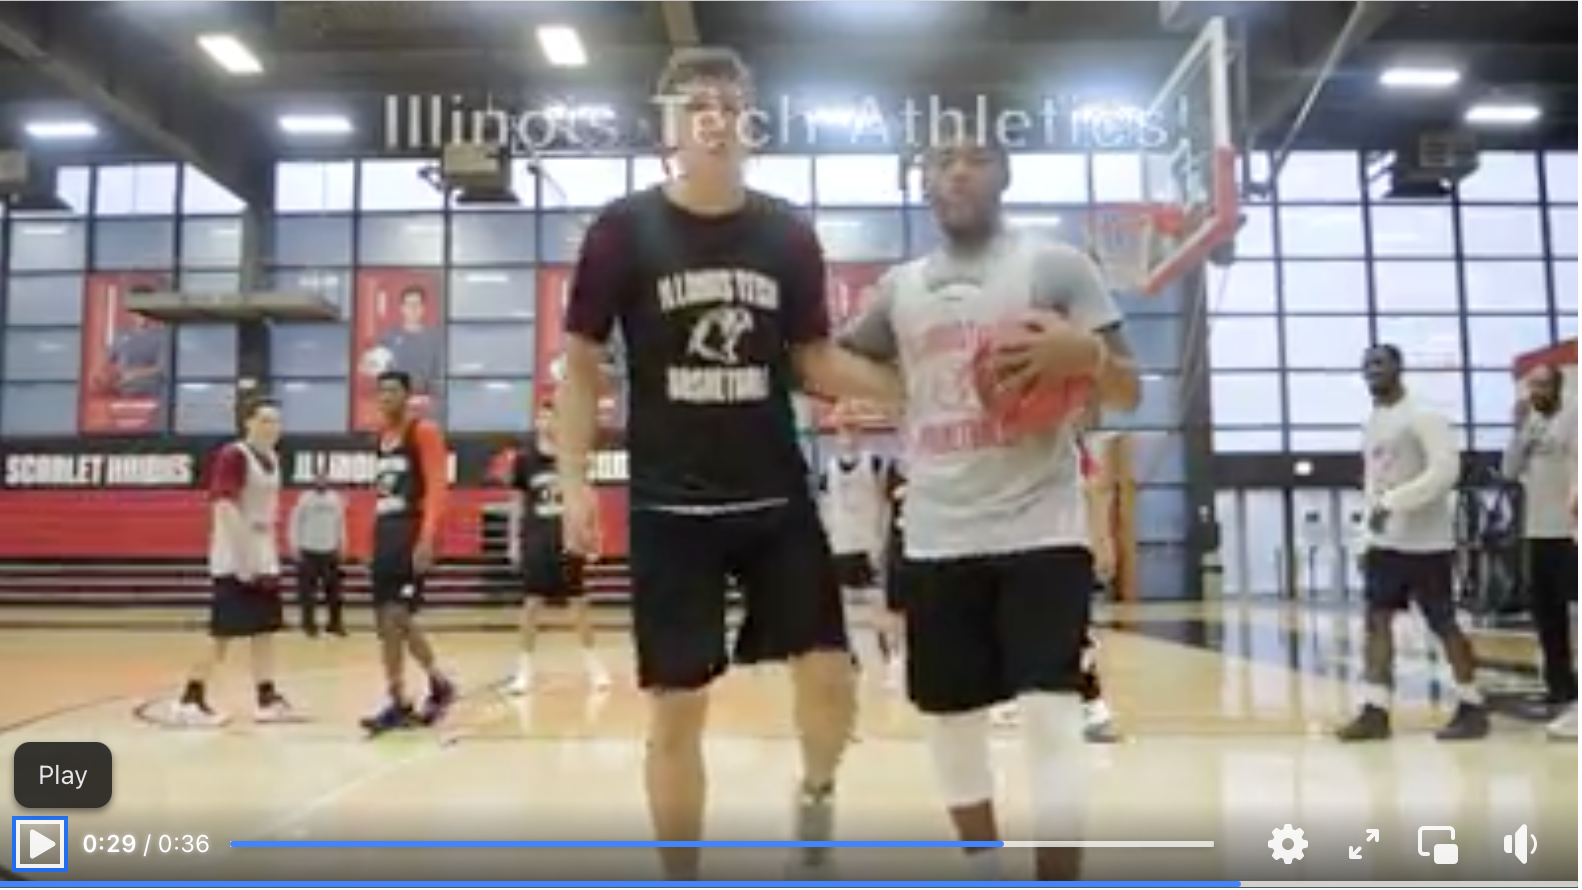 Thumbnail of a social post video featuring the Illinois Tech men's basketball team for the university's third Giving Day Campaign in 2017.